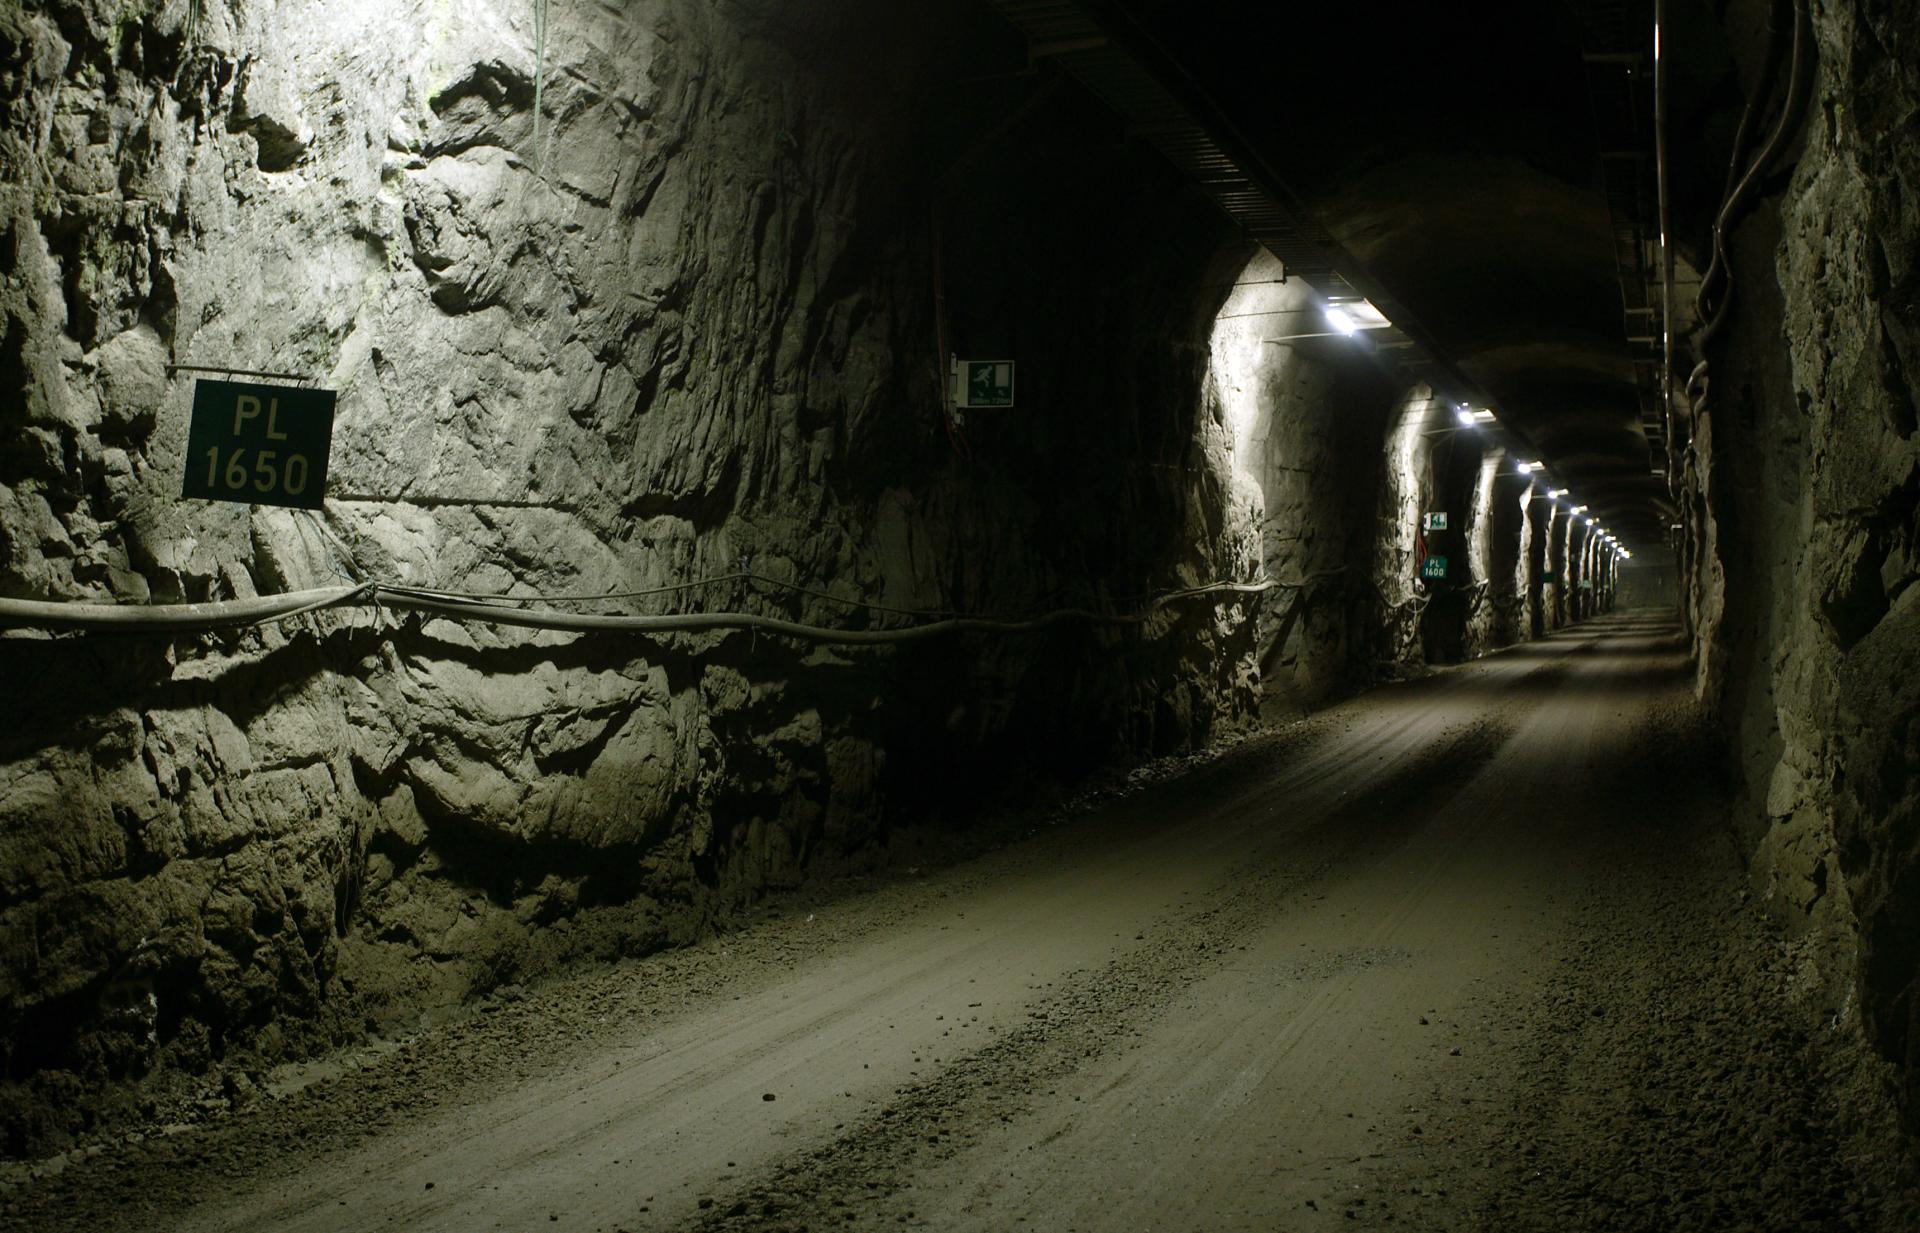 A long view of an empty tunnel with rocky walls and overhead lights leading in the distance.